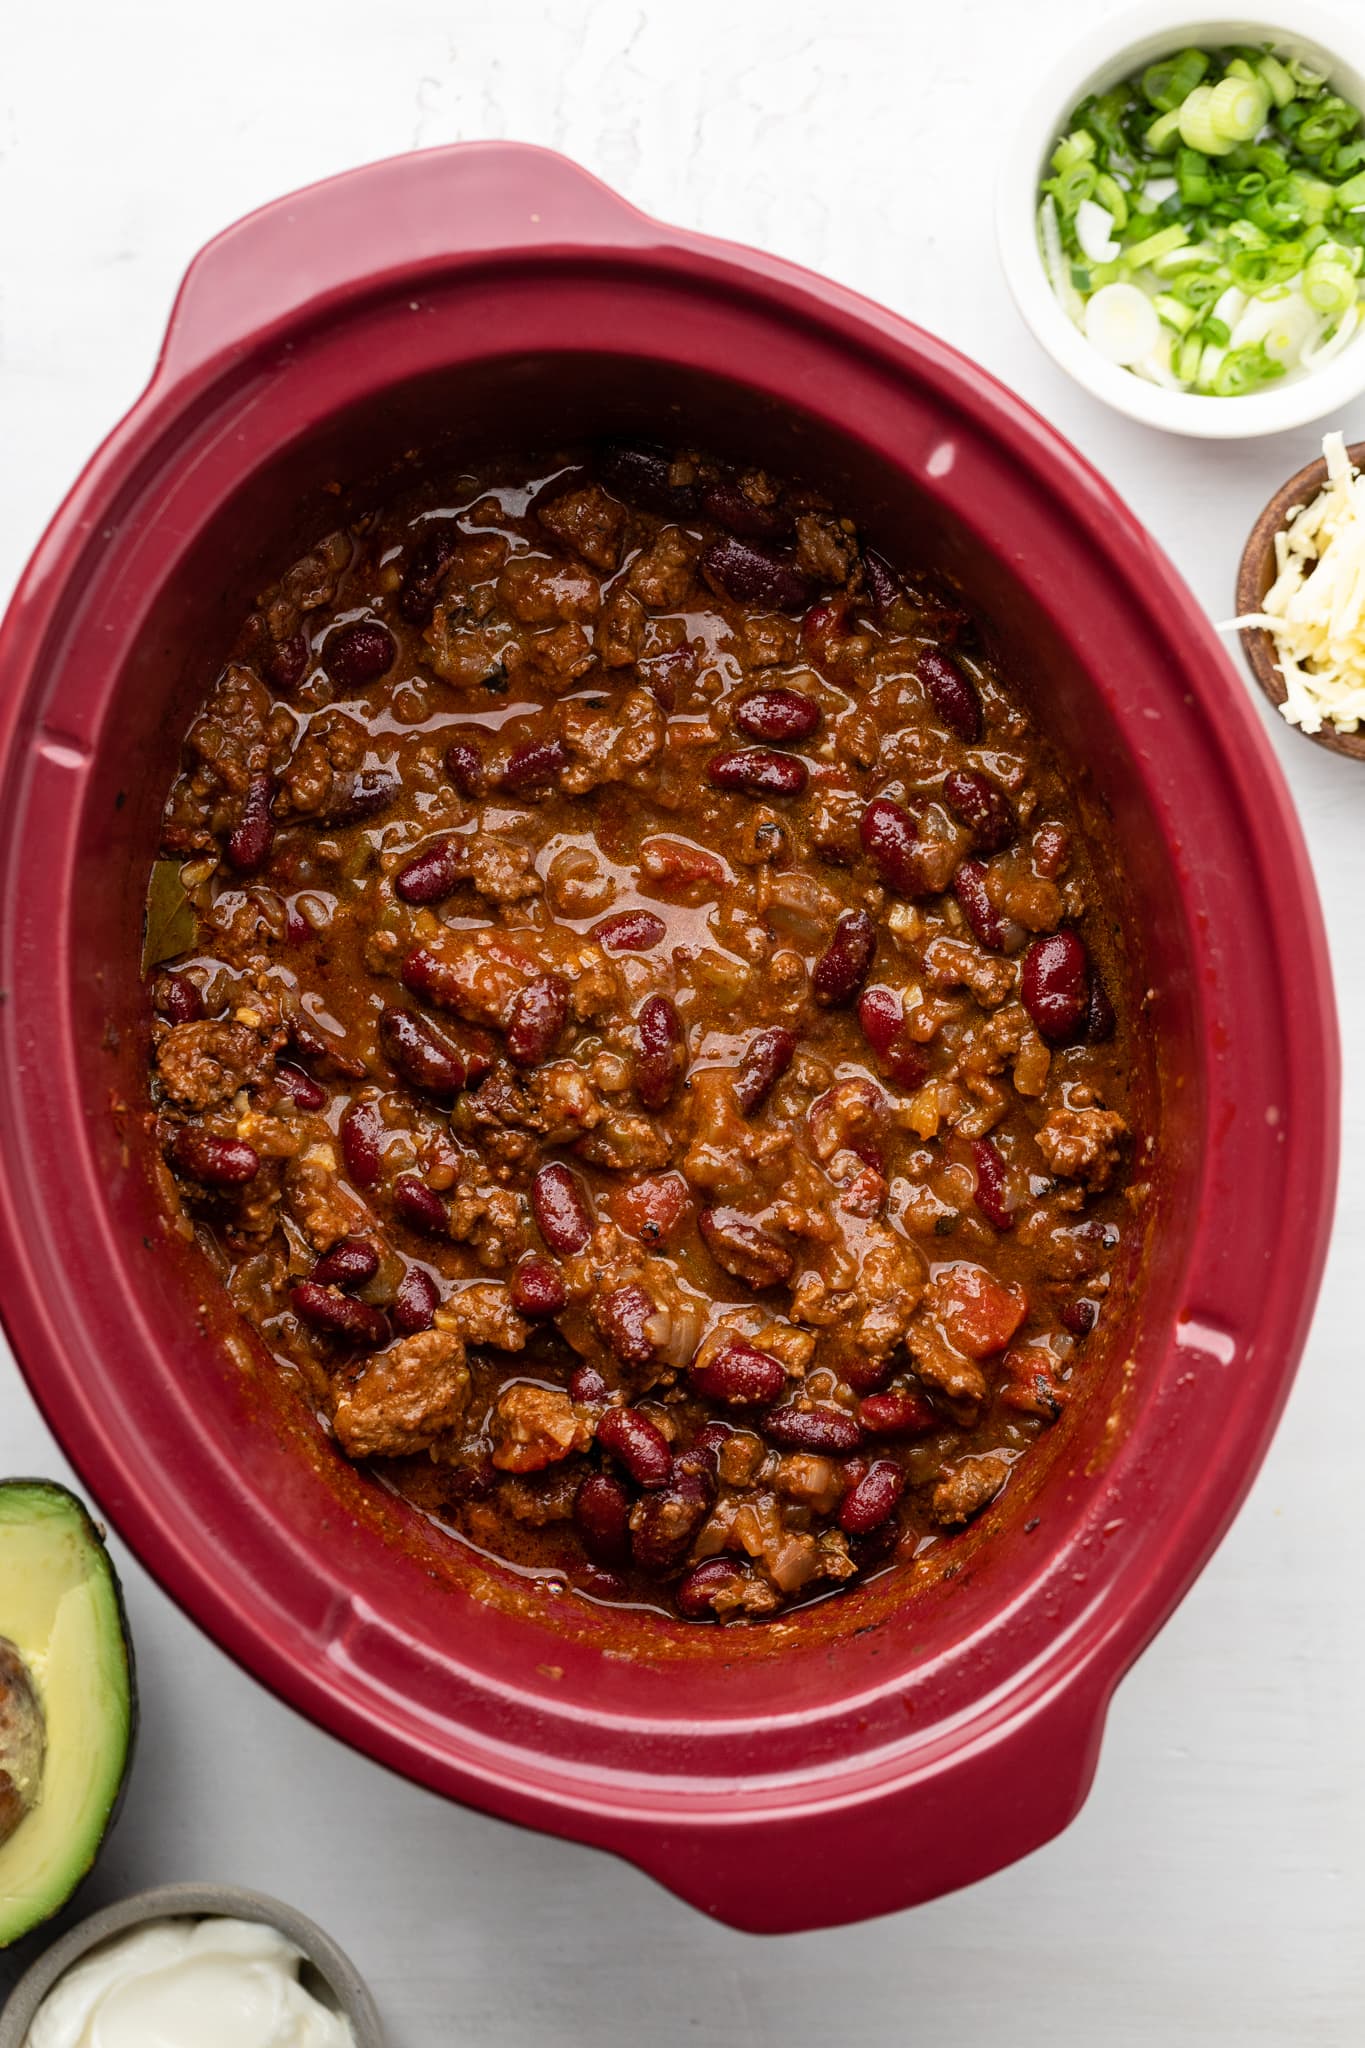 Healthy Slow Cooker Chili - All the Healthy Things